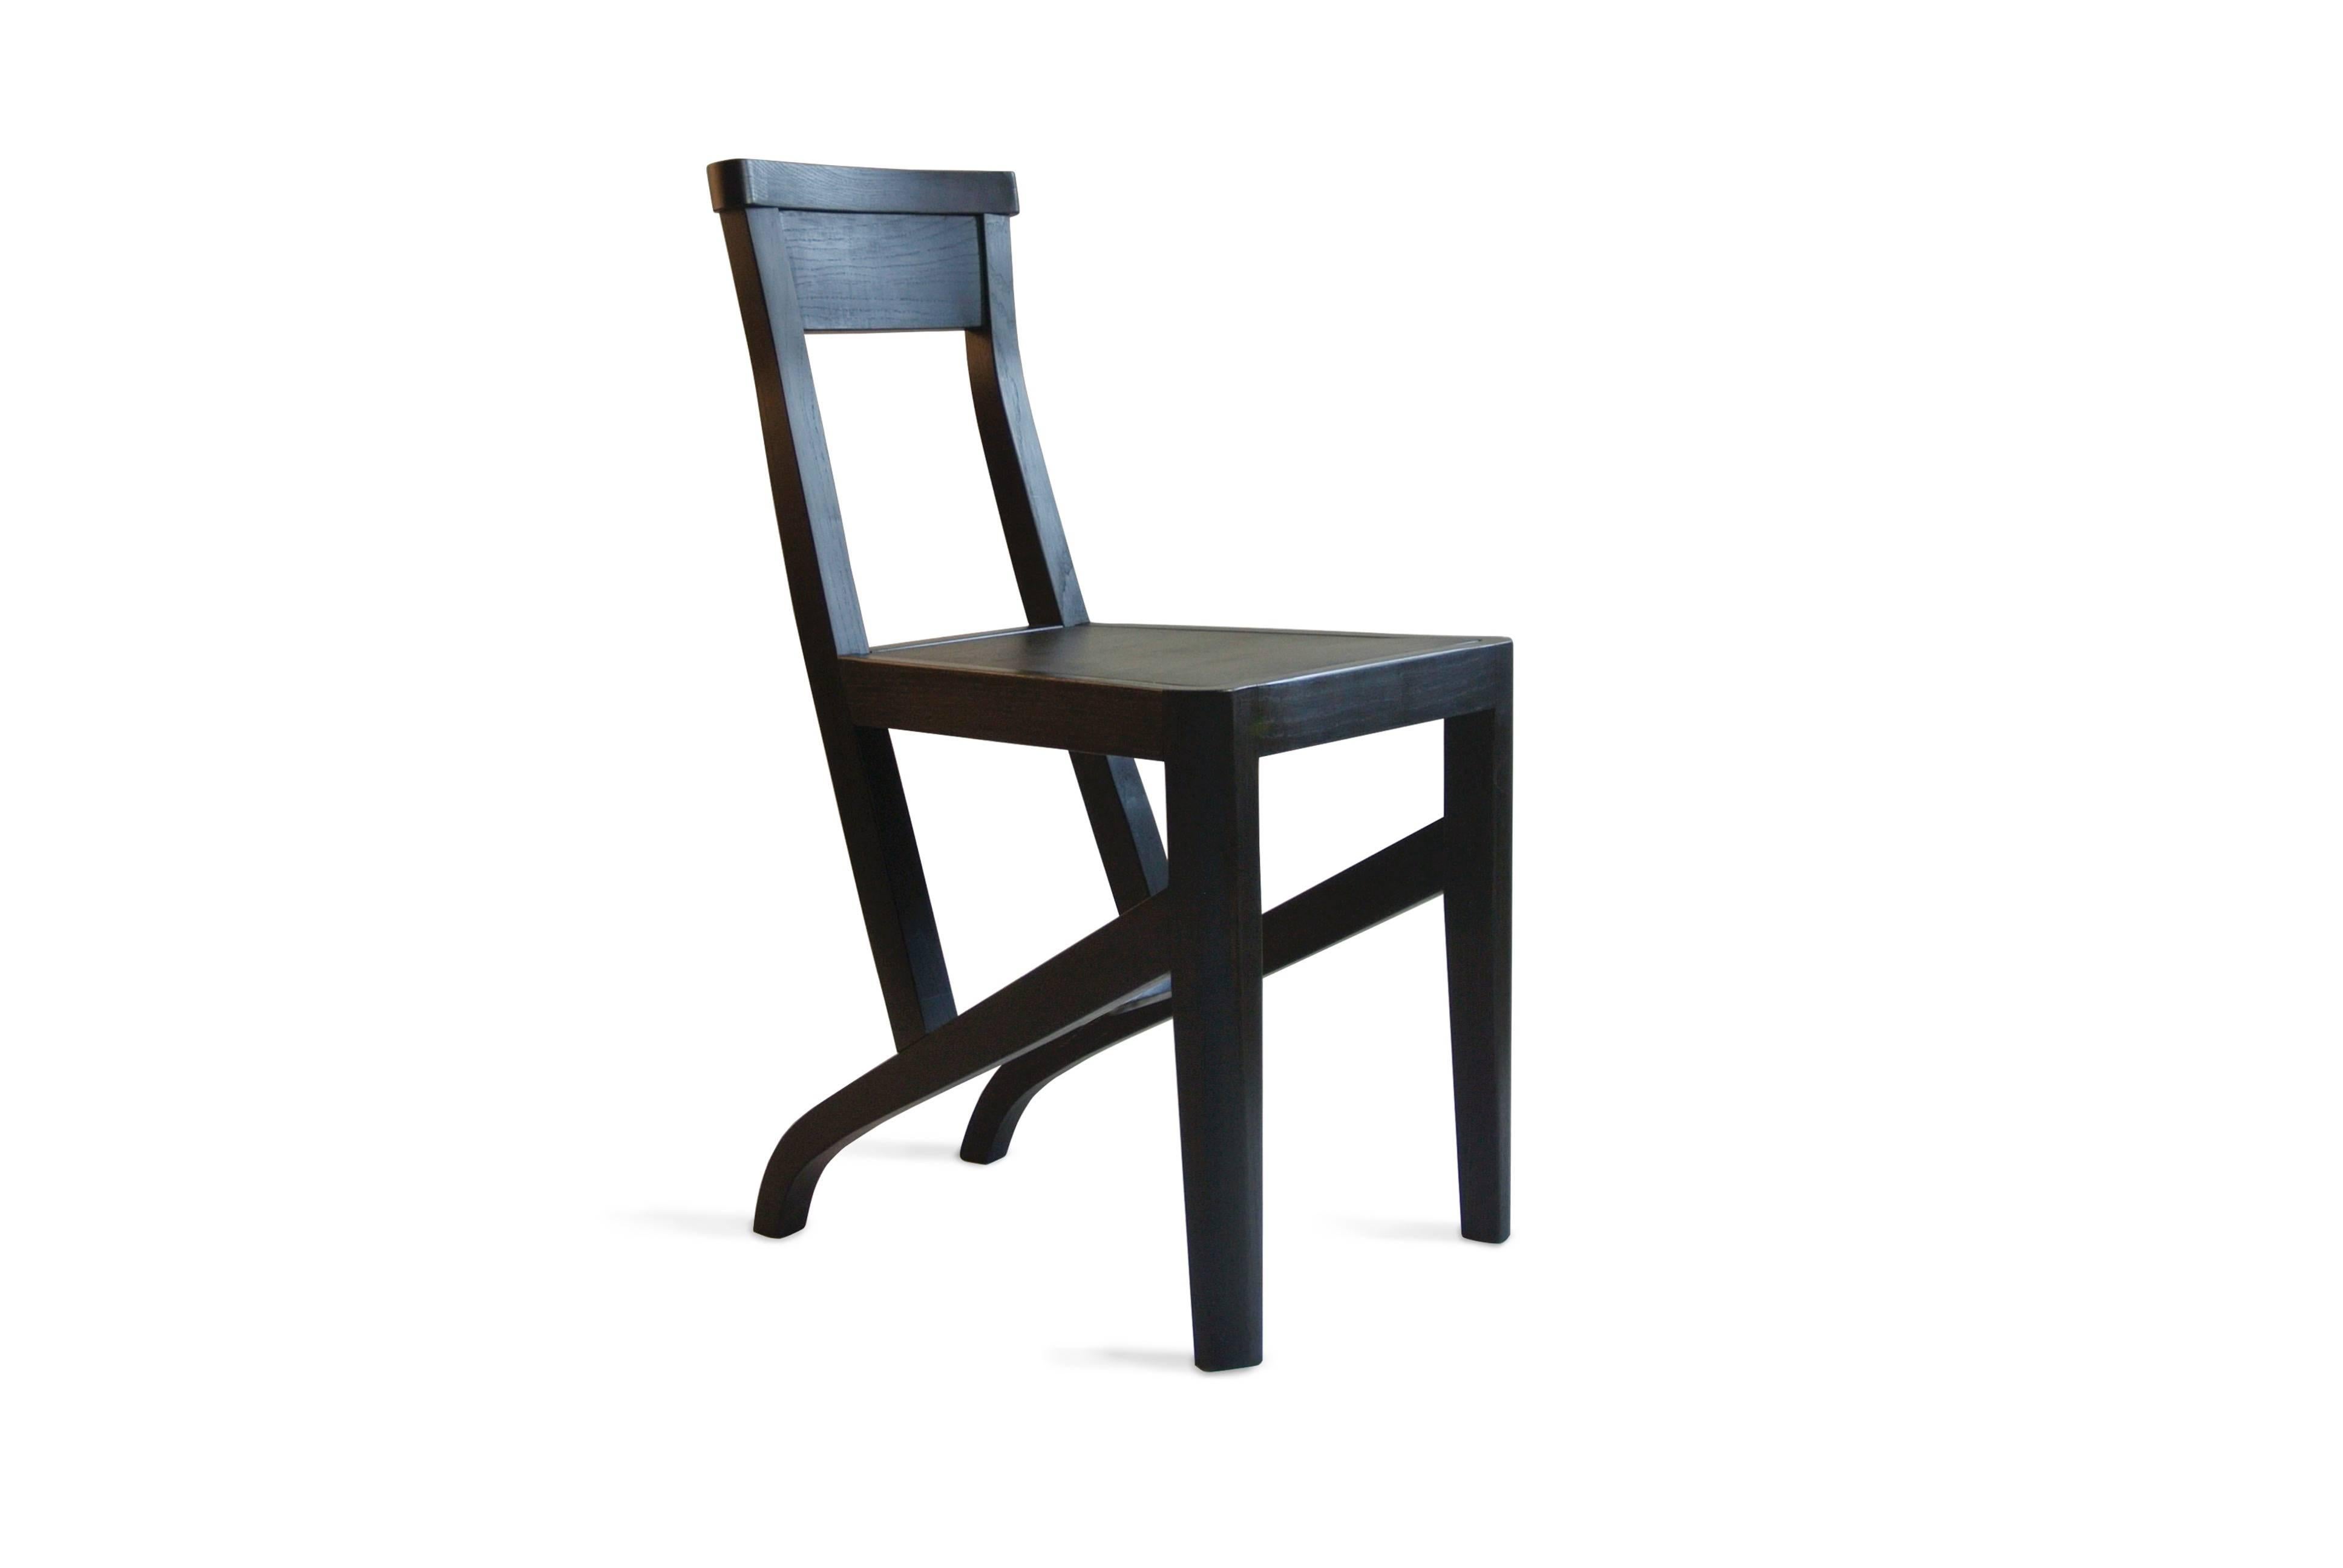 This second, simpler version of the distinctive Potentino chair complements the range. With a lower back and smoother details, it is perfect for both restaurants and home dining. Its simplicity succeeds in combining comfort with a modern outline